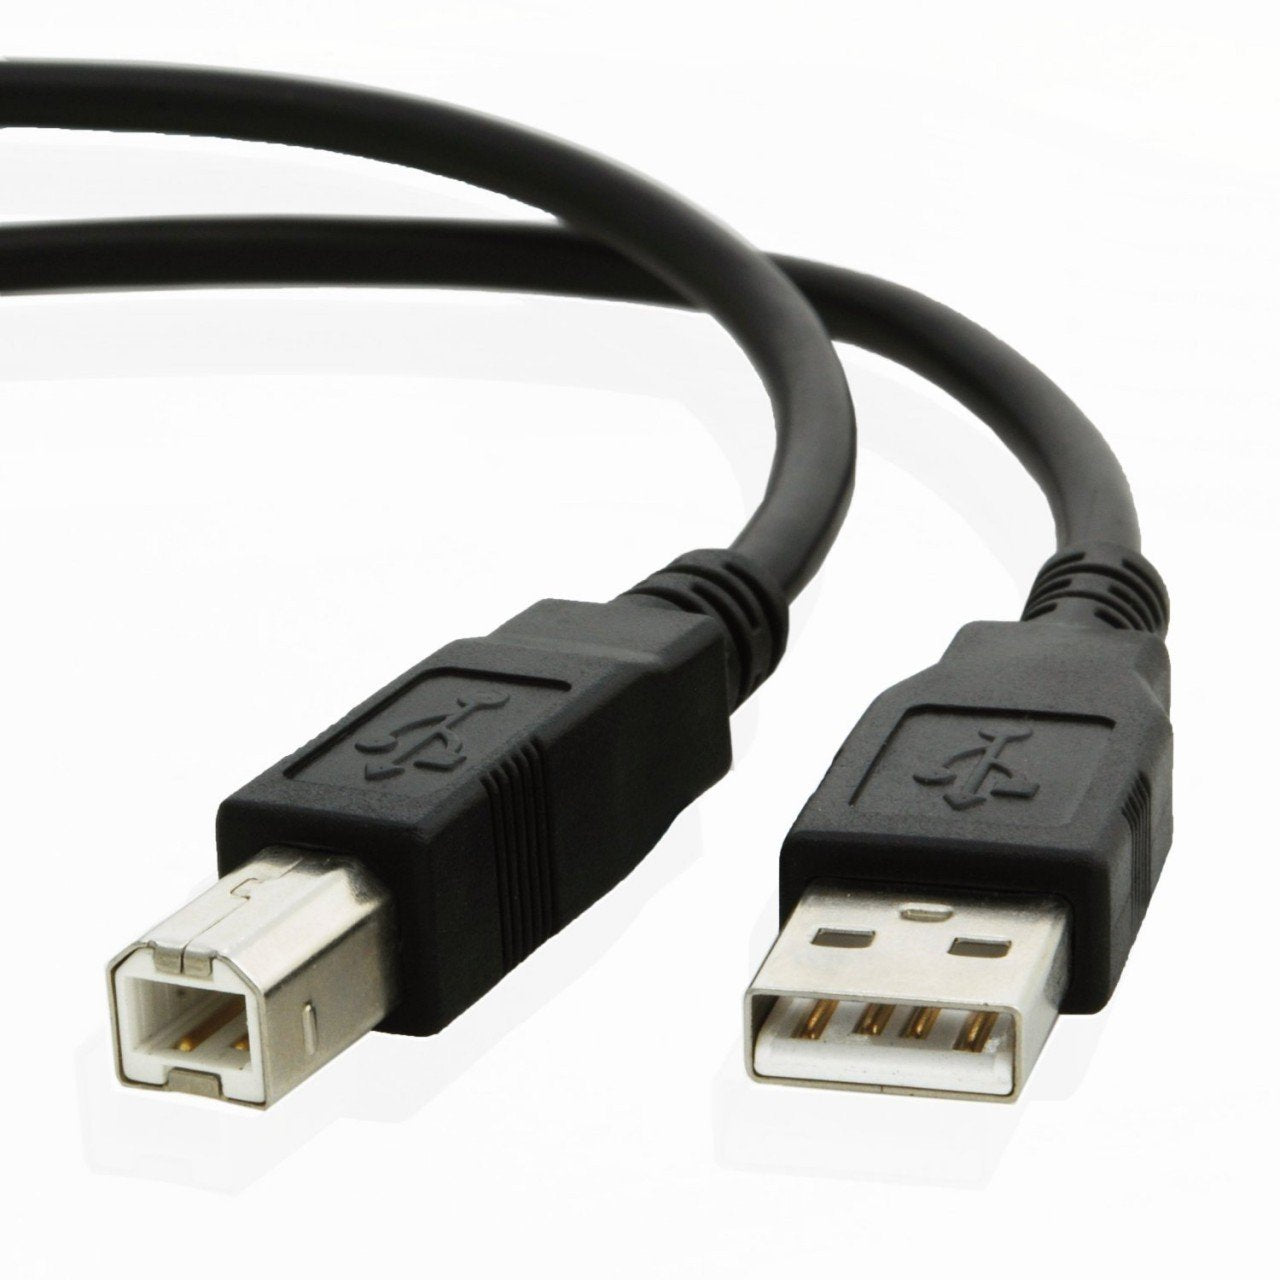 USB cable for Hp LASERJET PRO M203dn